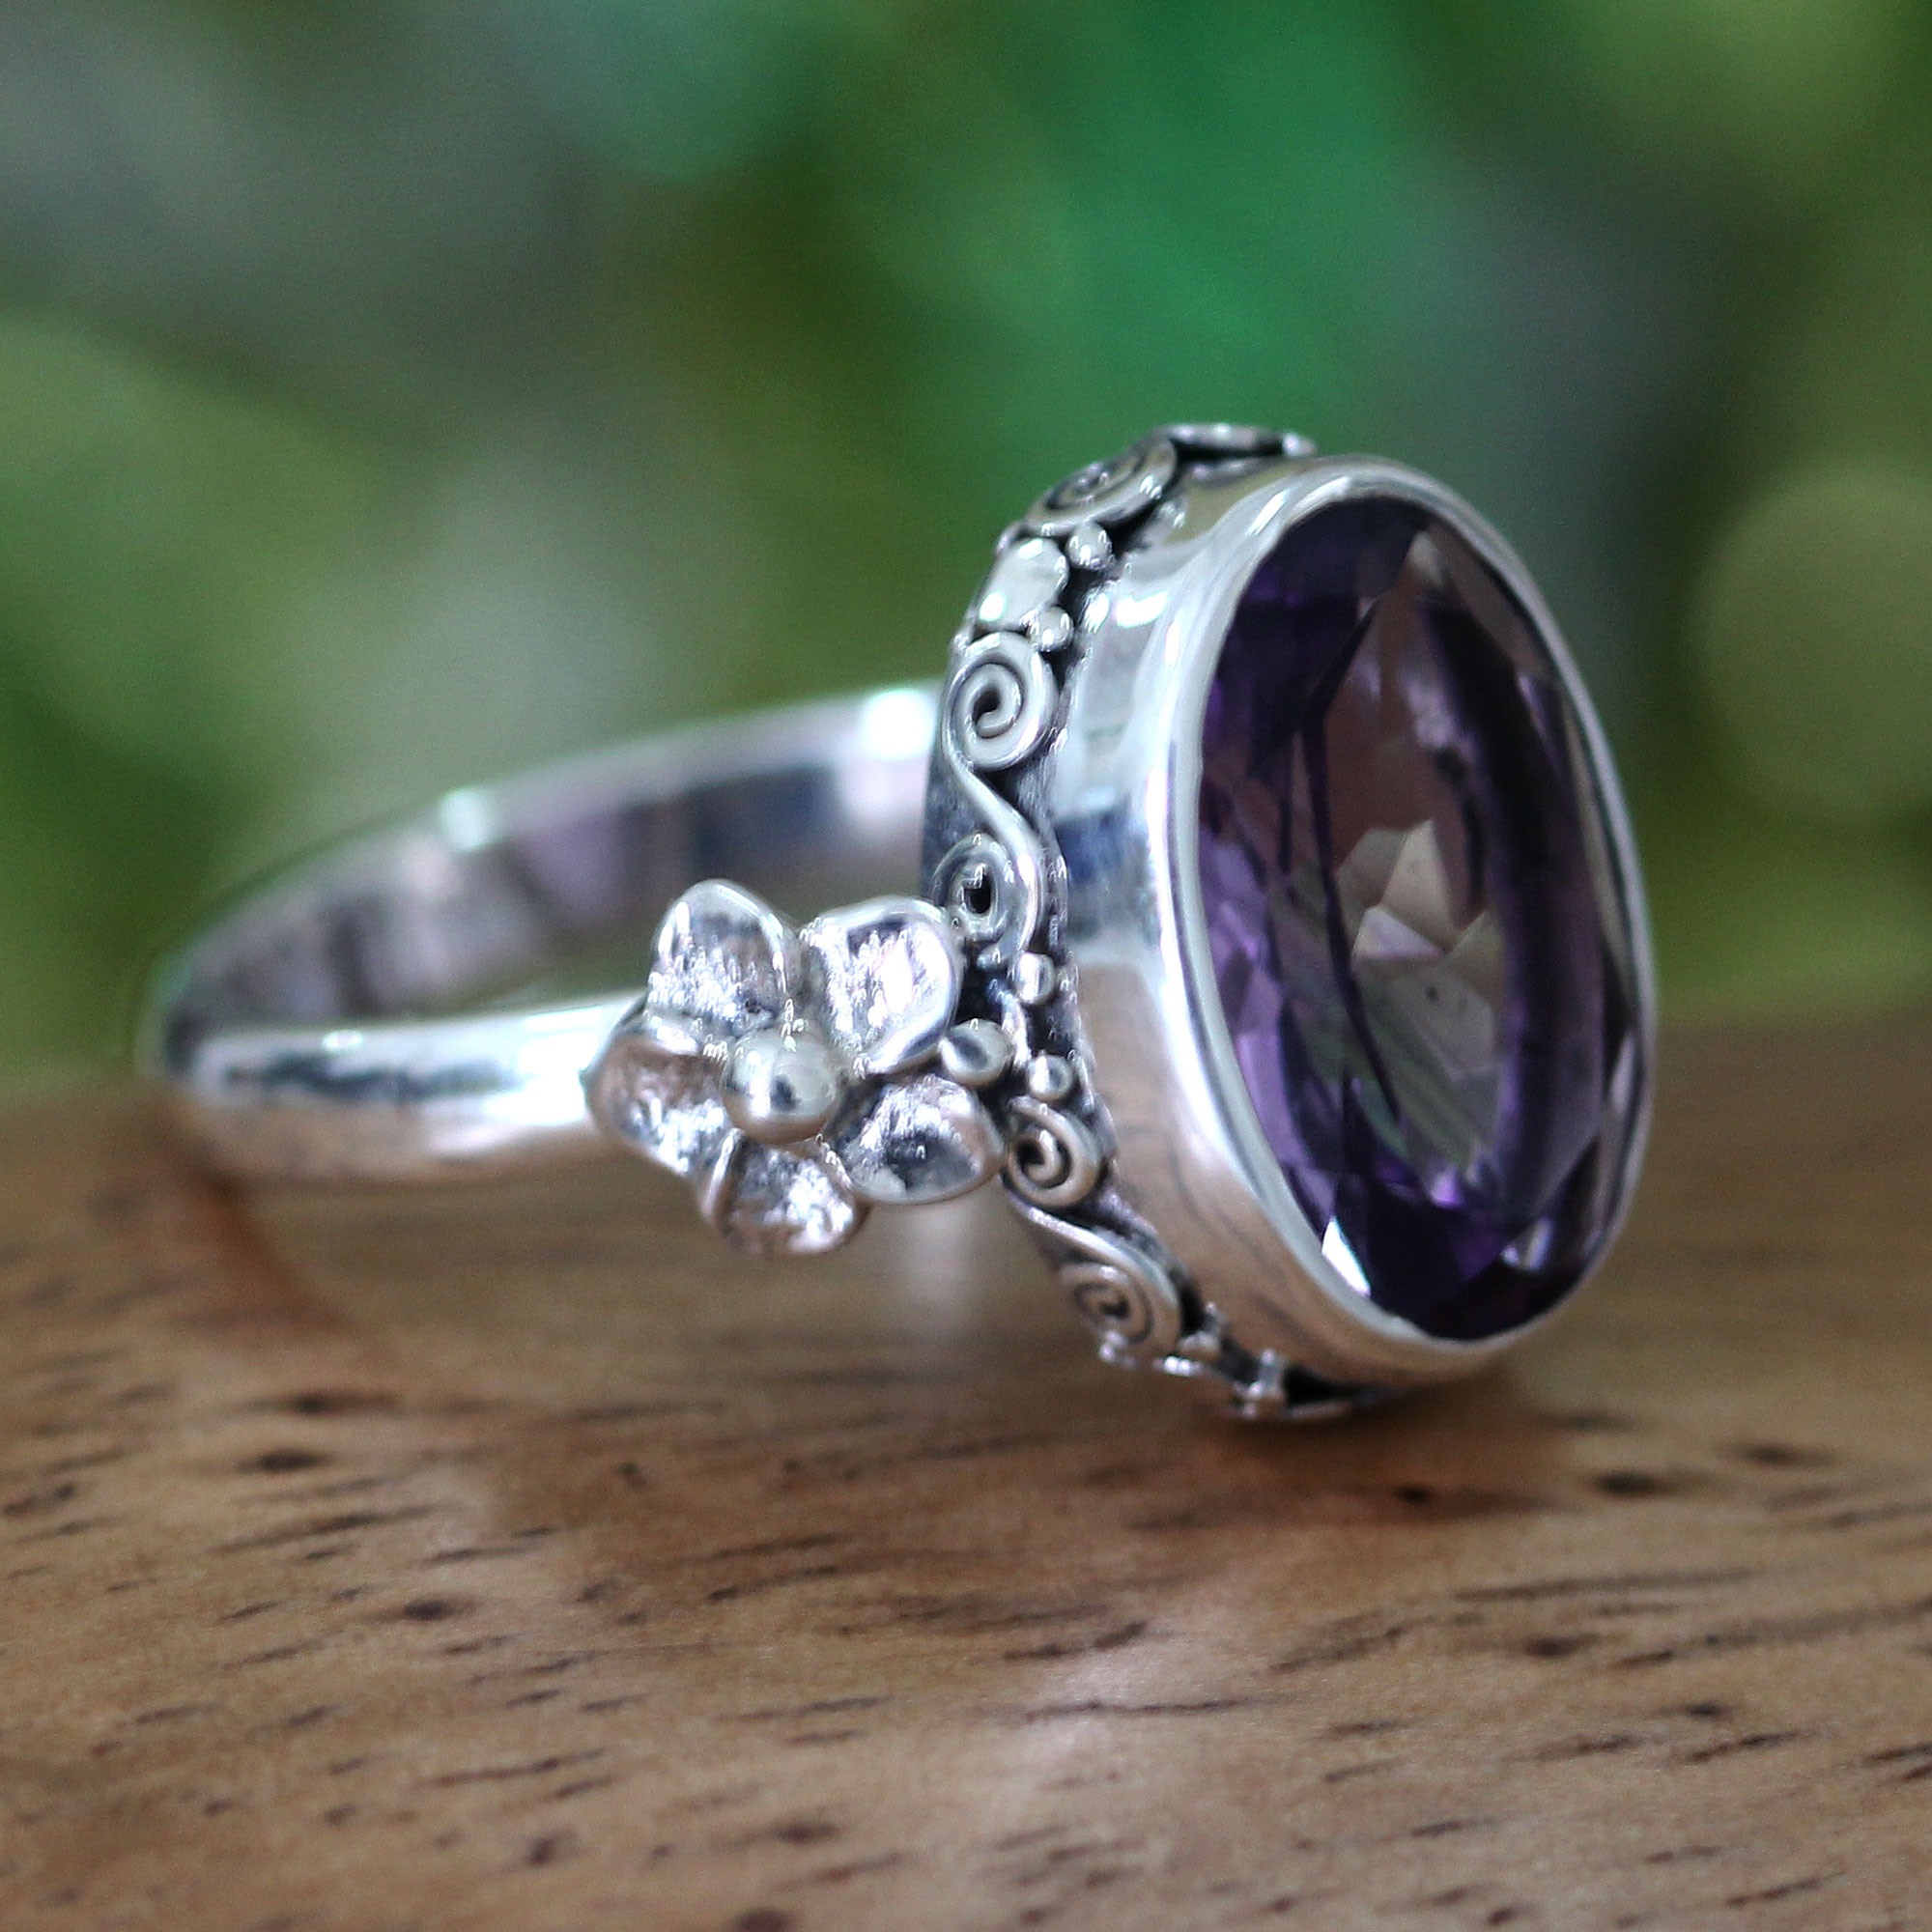 Handcrafted Floral Sterling Silver and Amethyst Ring - Frangipani Allure |  NOVICA